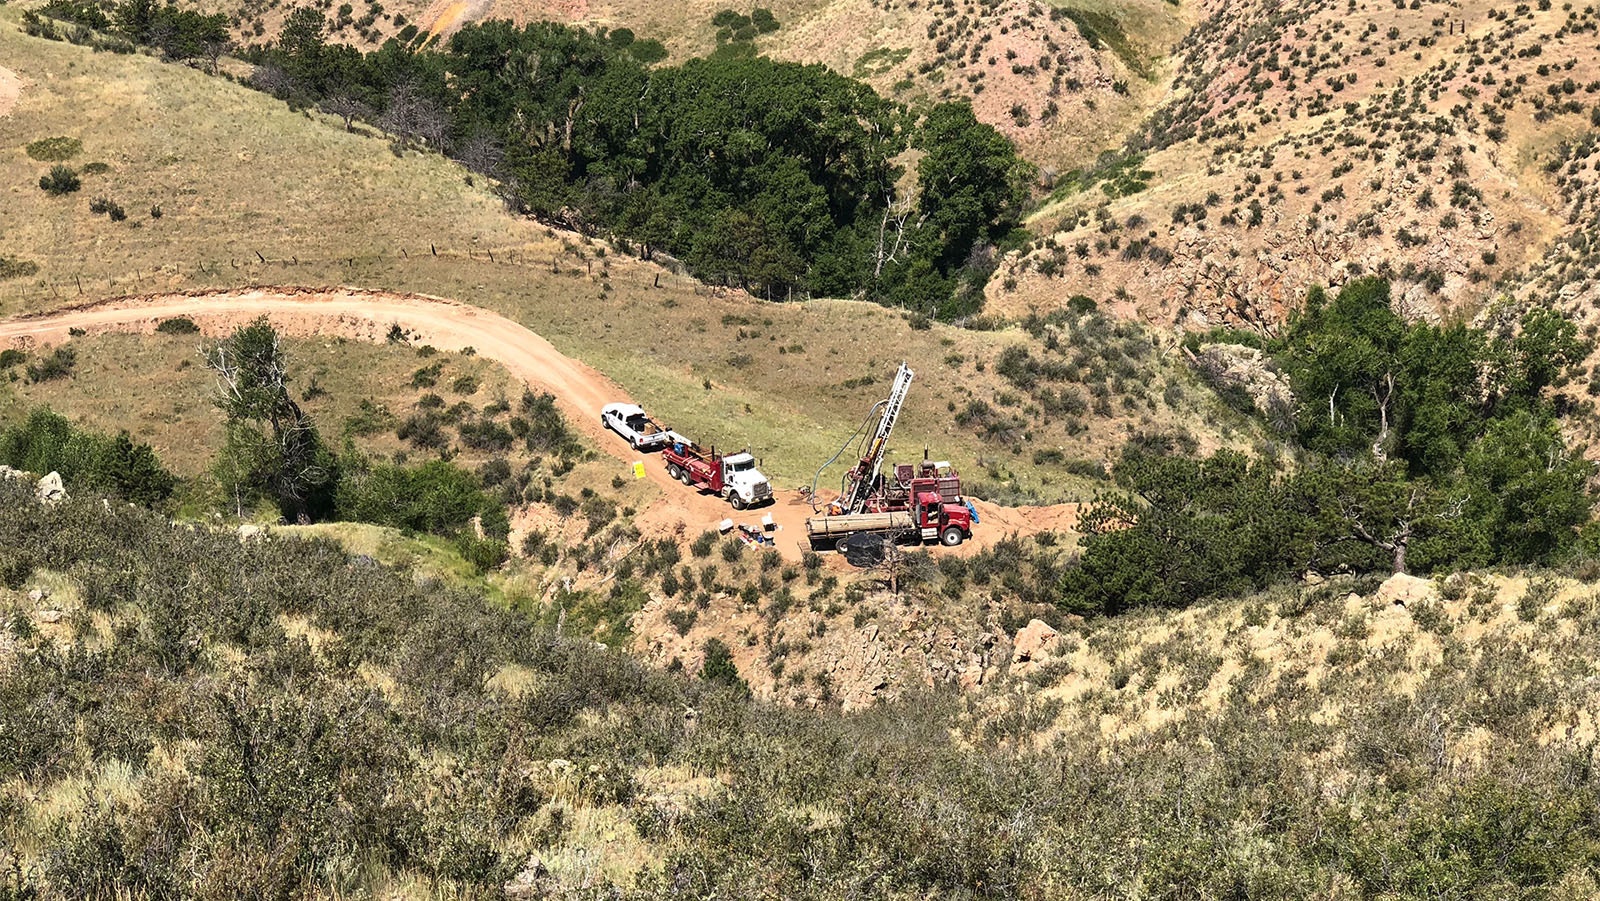 Crews scout an area about 20 miles west of Cheyenne in 2018. Now U.S. Gold Corp. wants to build the CK Gold Mine at the site and is going through the state permitting process.